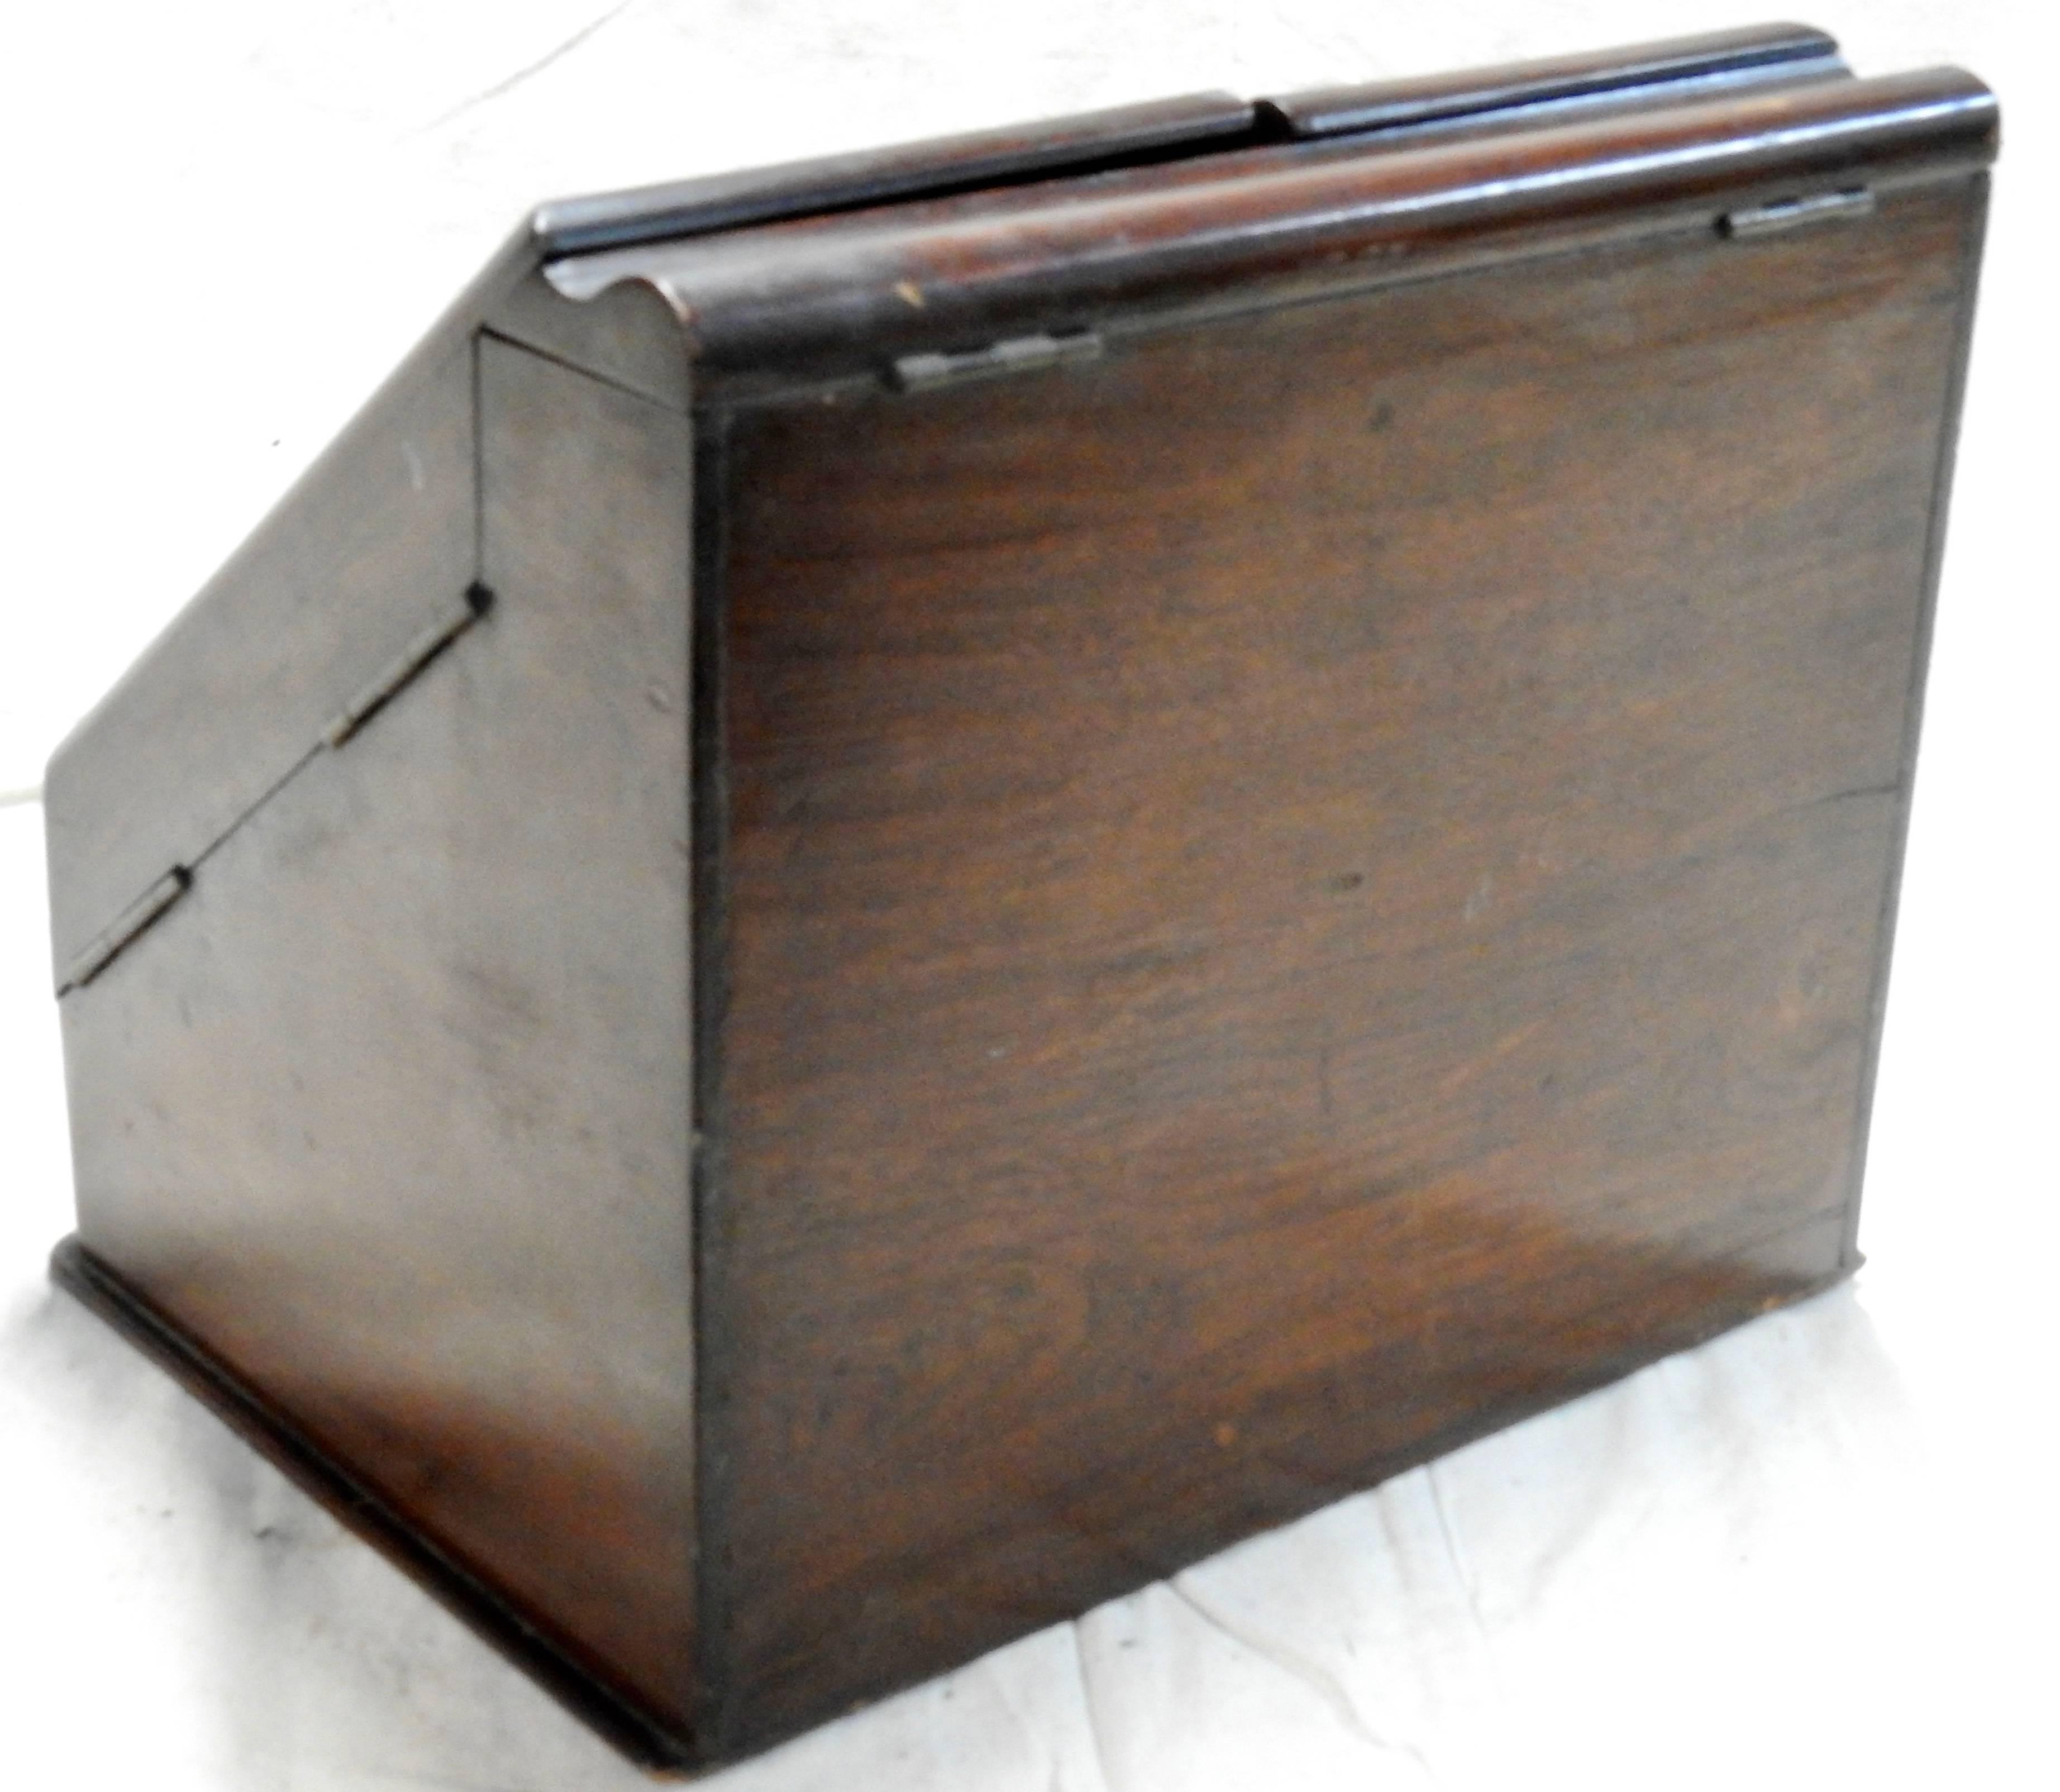 This walnut desk organizer is full of hidden compartments. It was made in England in the early 20th century. The top panels open to an assortment of compartments for organizing your paper goods. A hidden drawer opens on the bottom. The curved tray